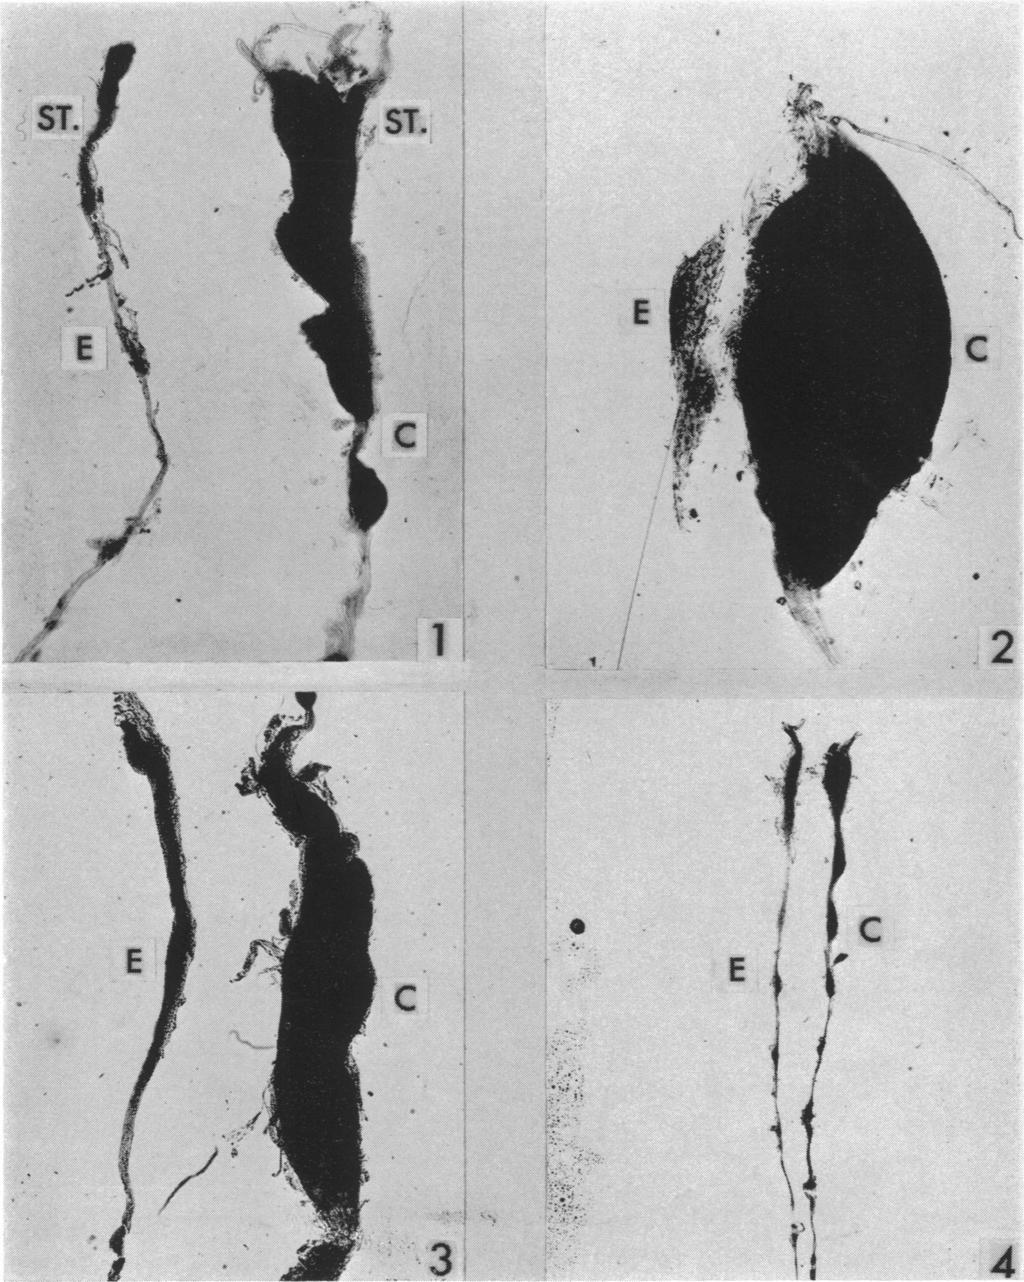 4J 9 1.2 }as ~~~~~E ; i e1 t is a, L..?1 'j PLATE I.-Effects of rabbit antiserum against the purified protein of mouse salivary gland. FIG. 1.-Stellate (St.